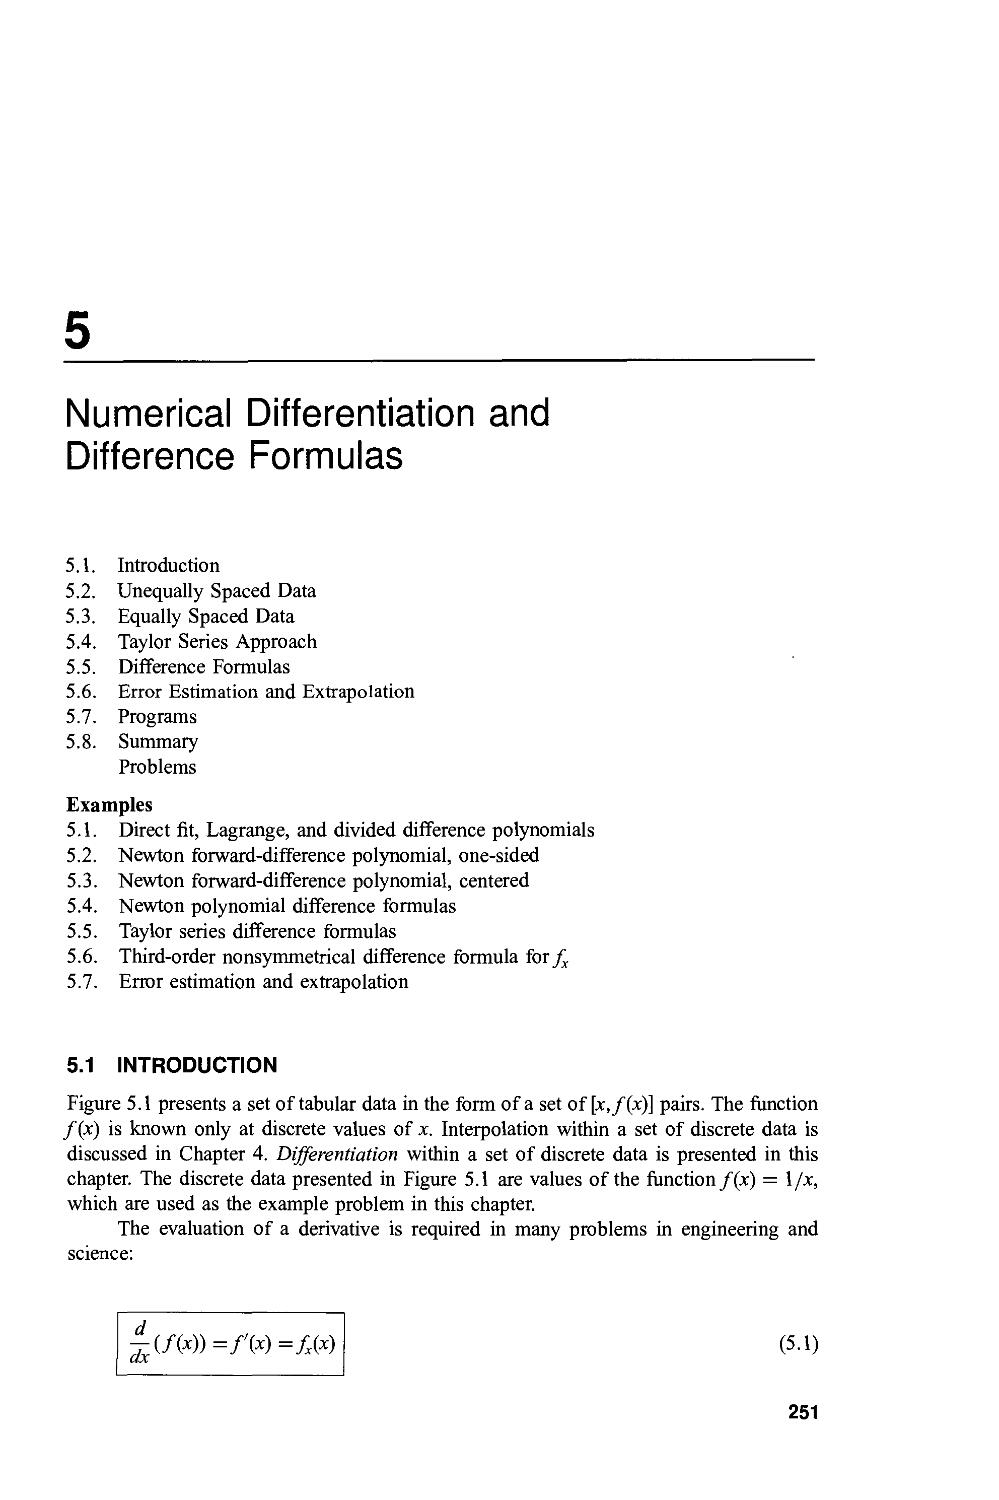 Numerical Differentiation and Difference Formulas